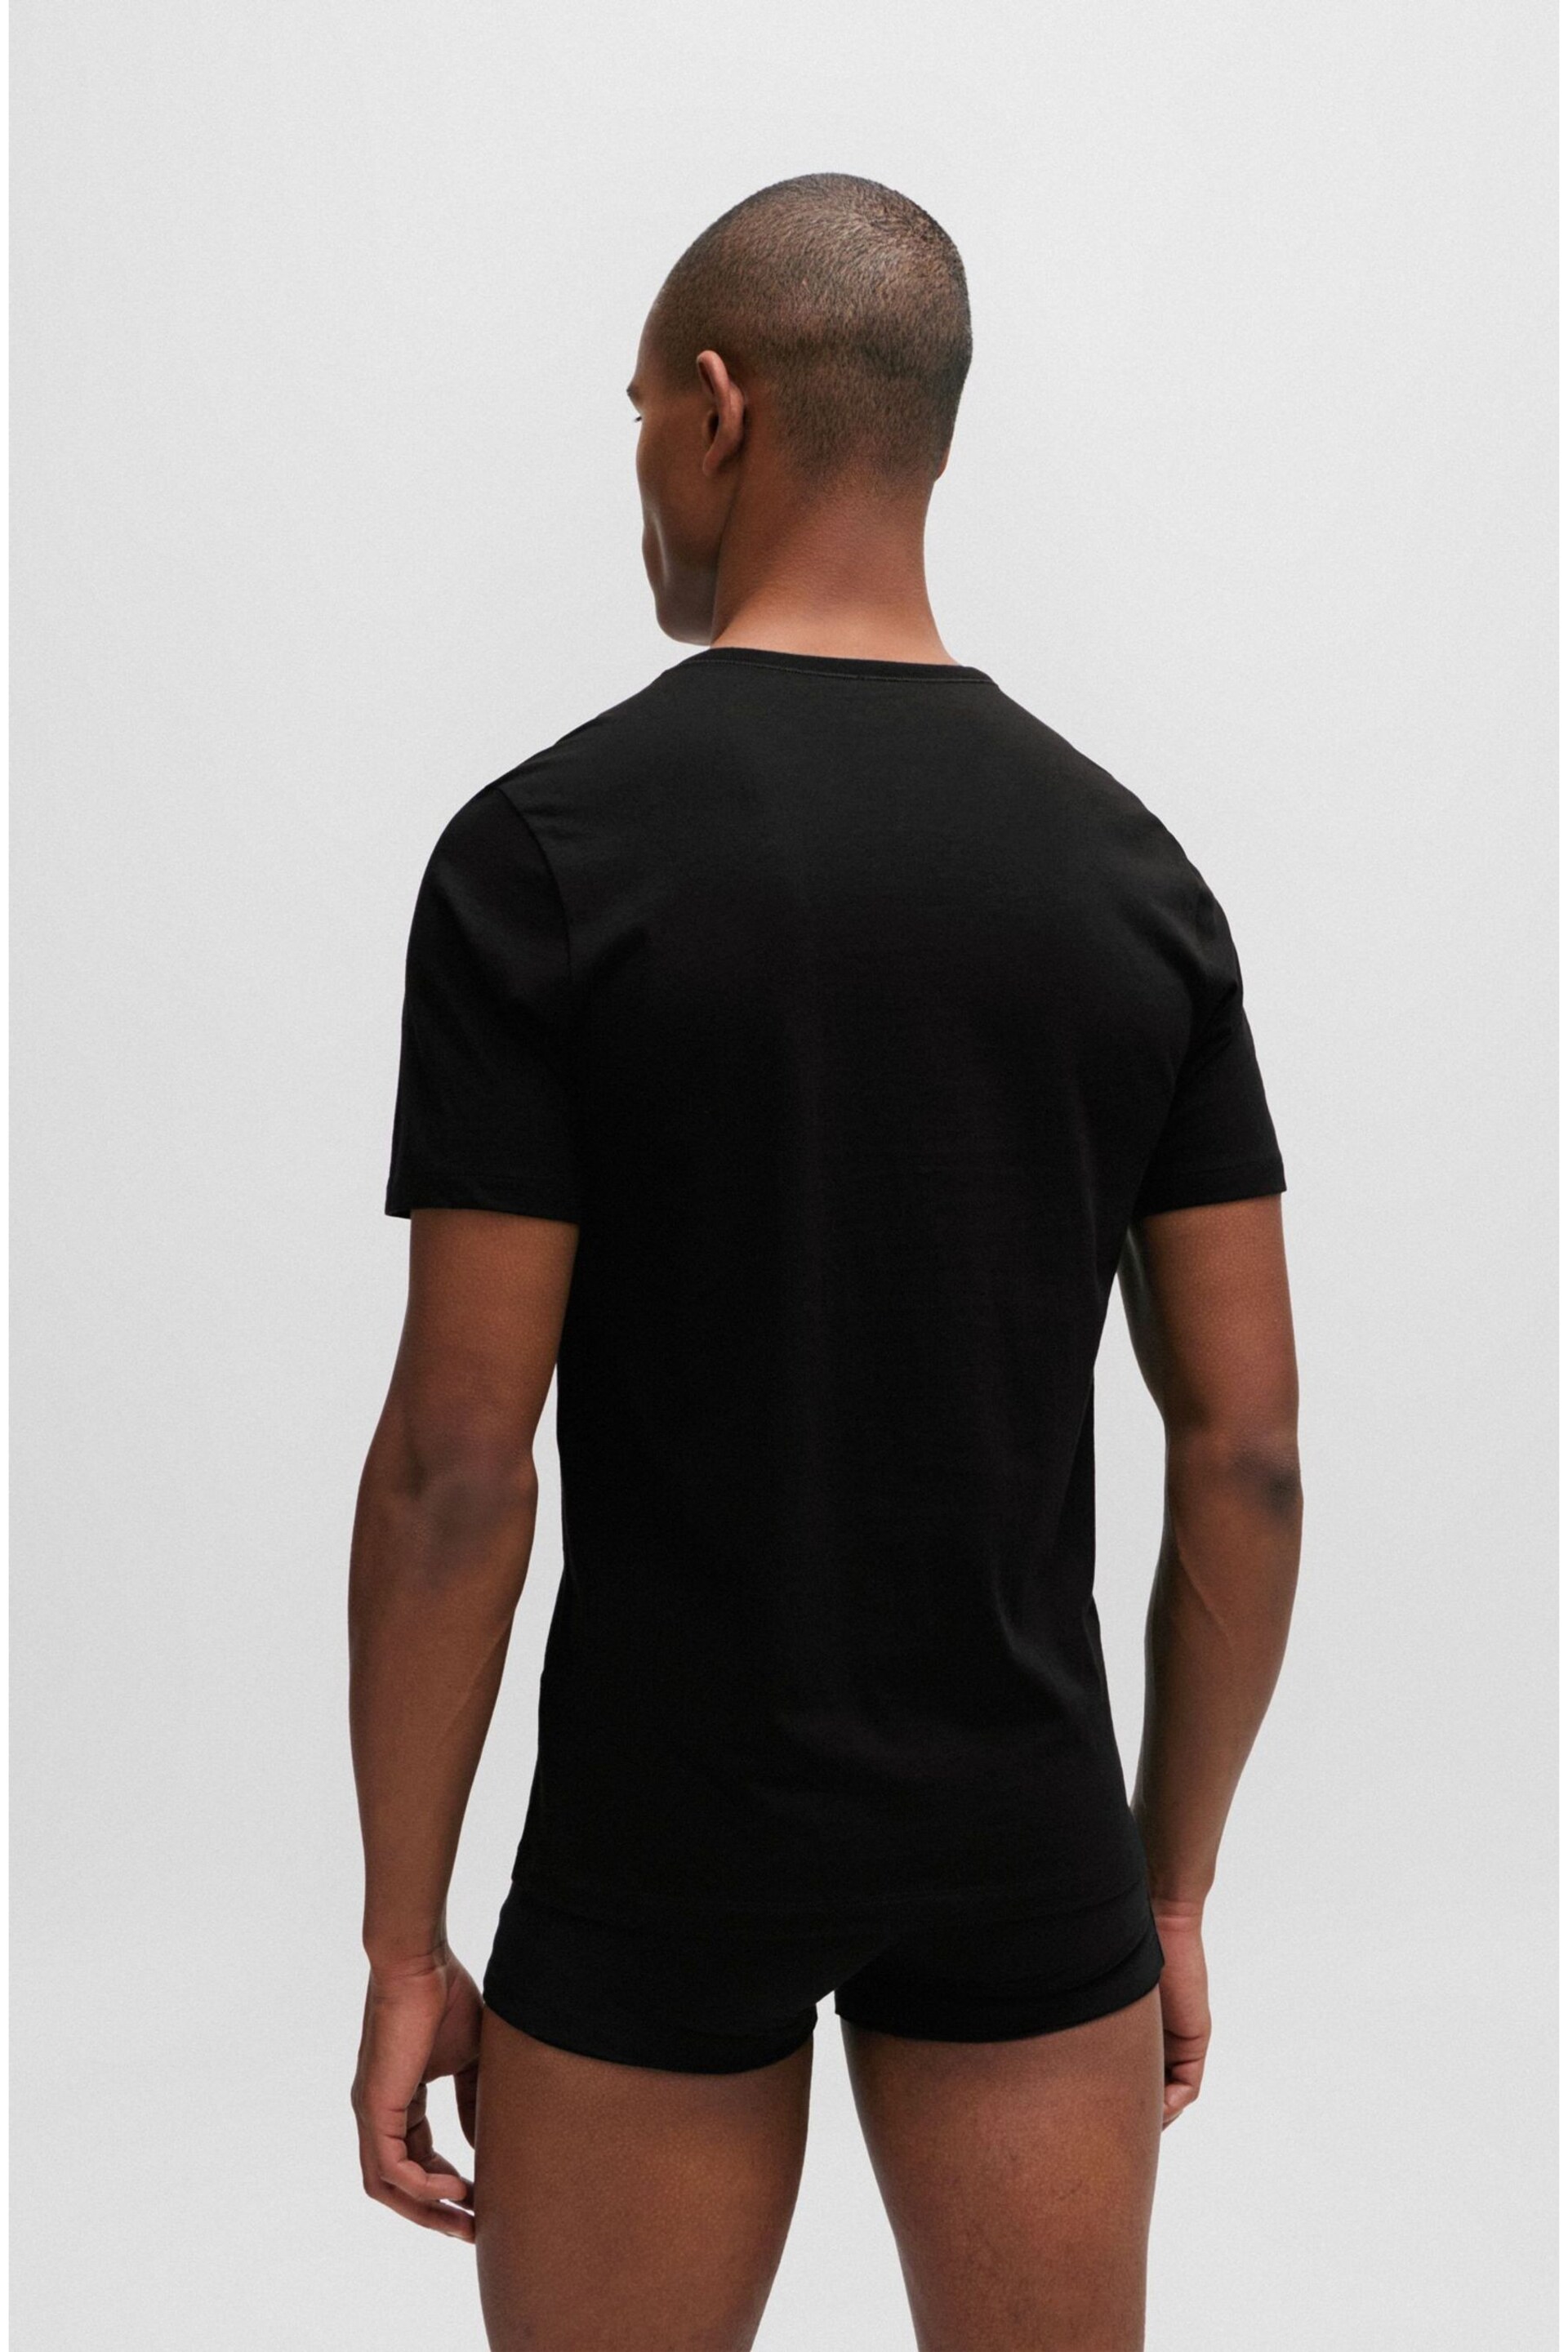 BOSS Black Three-Pack Of Underwear T-Shirts In Cotton Jersey - Image 5 of 5